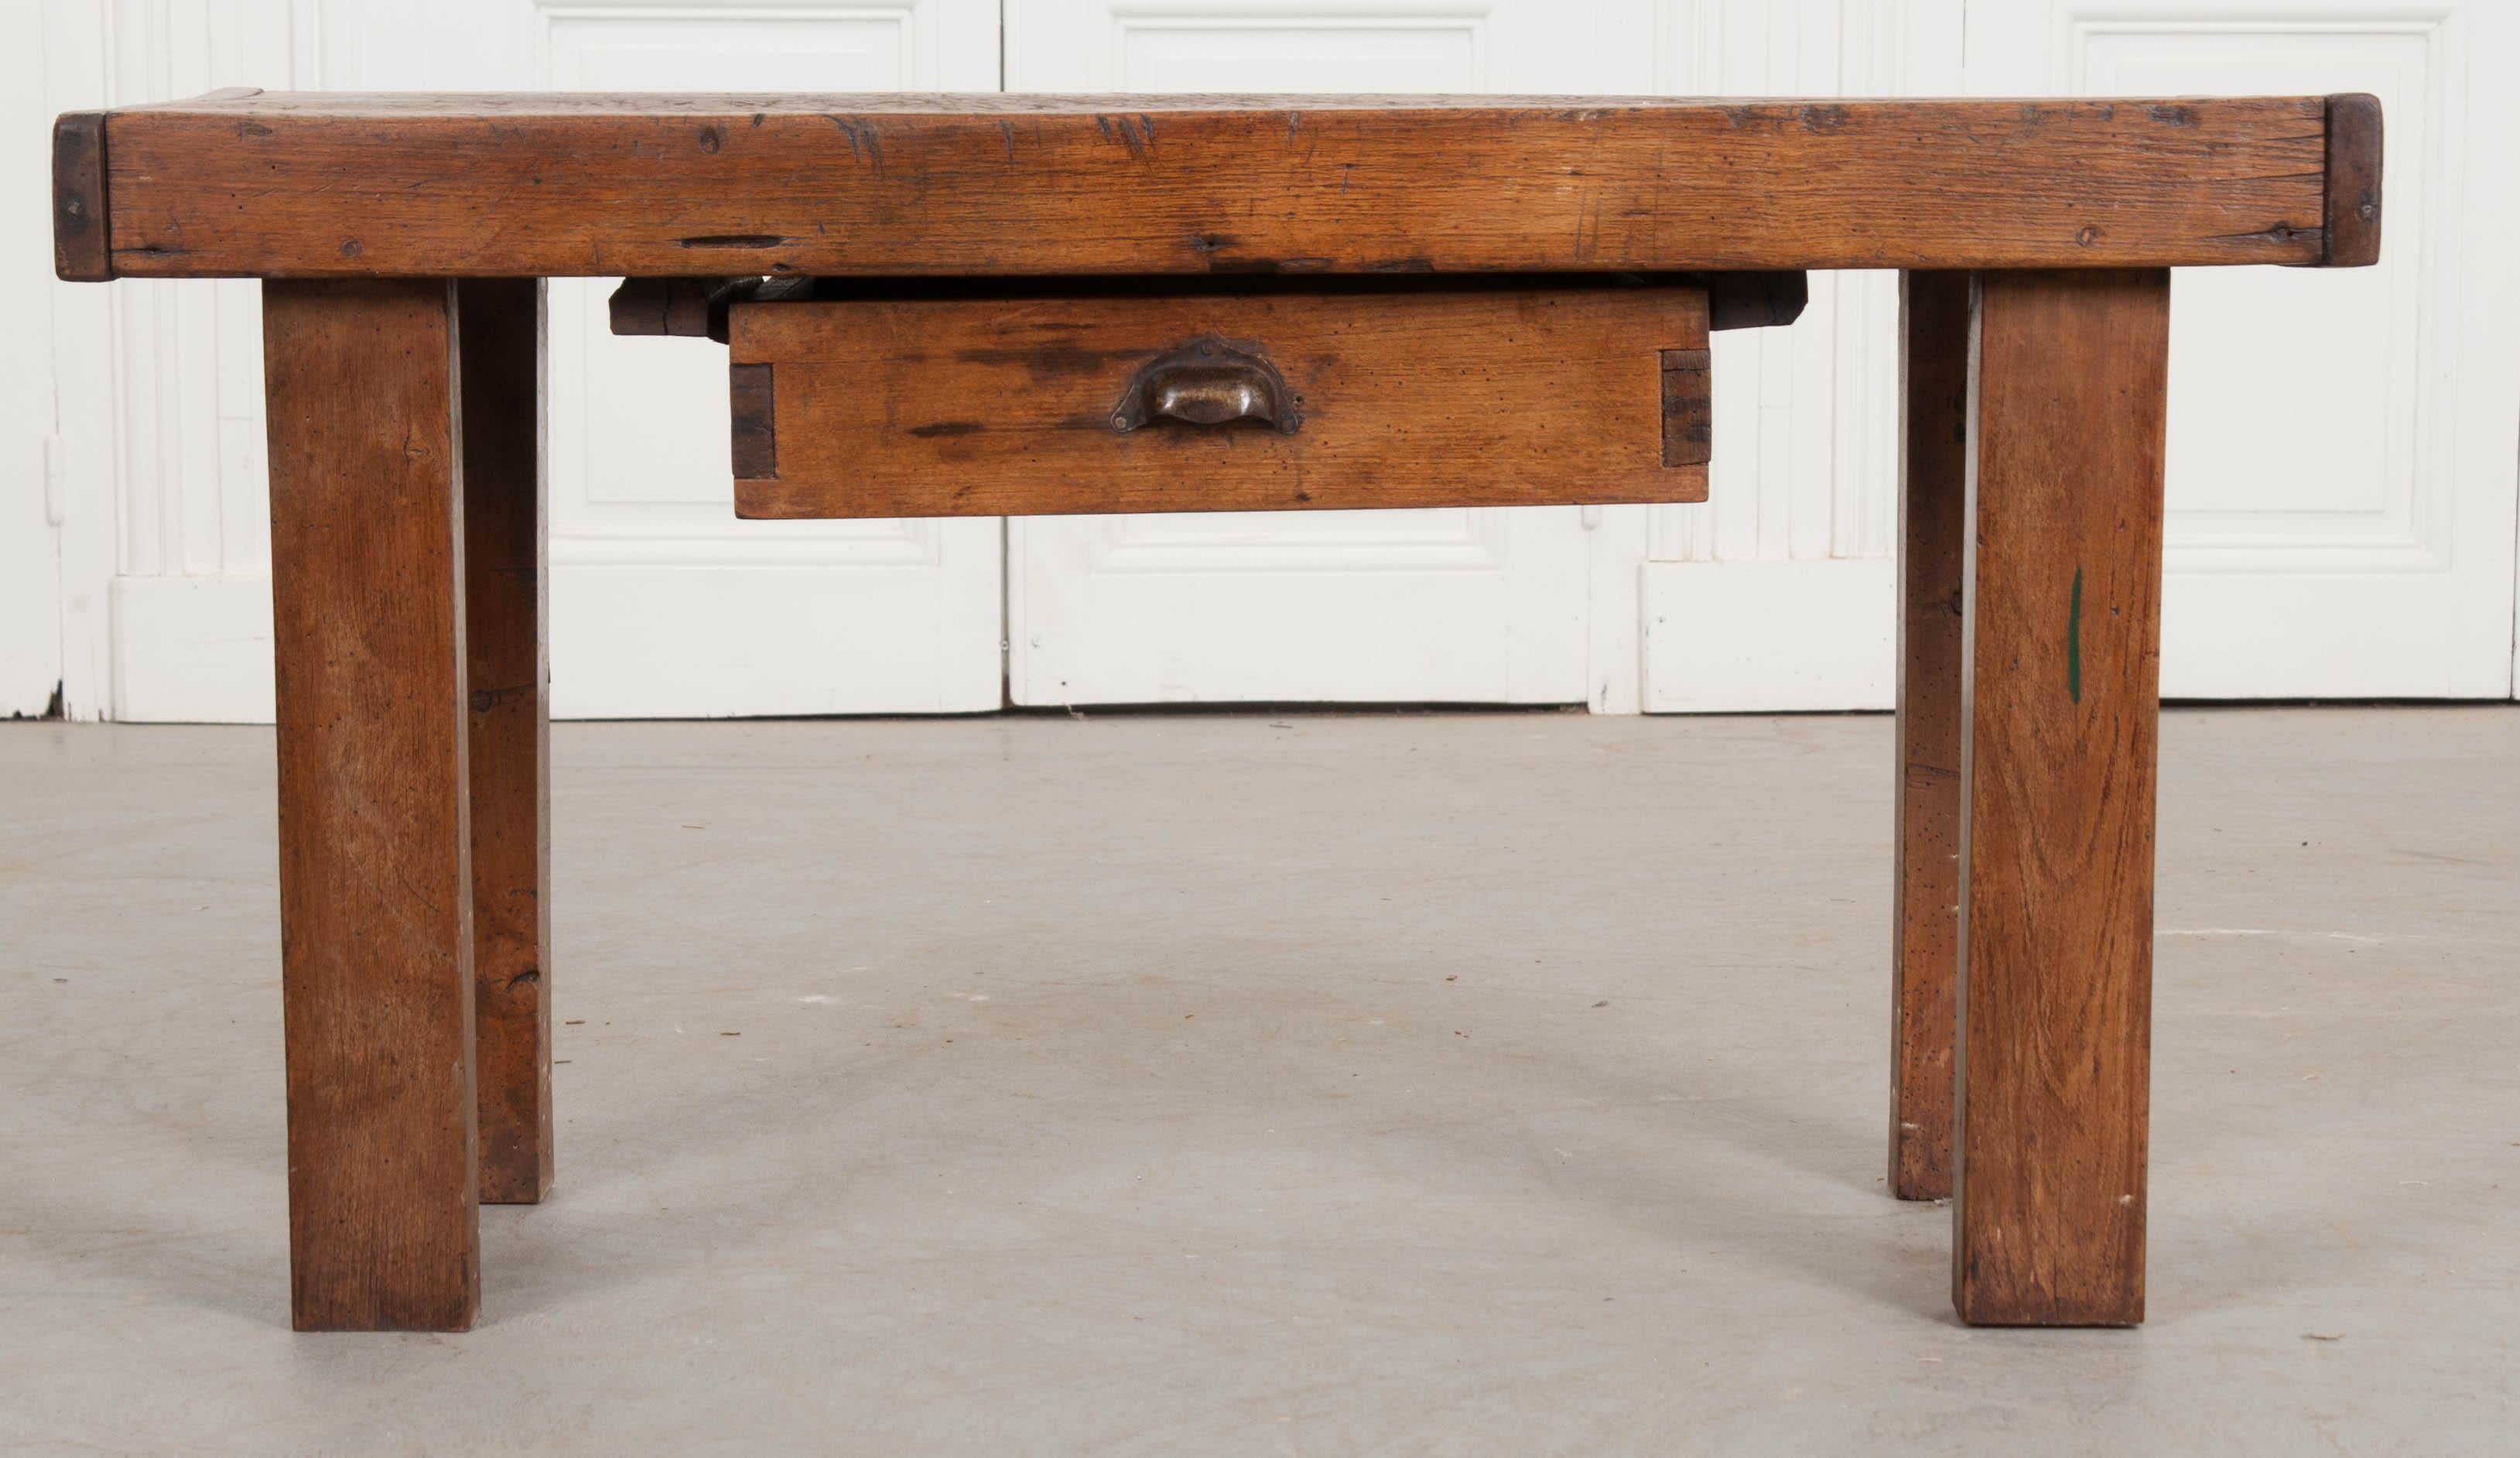 Converted from an antique walnut workbench, this excellent coffee table comes from 19th century France. The top has seen many projects through to completion, as made evident by the scores of scratches, scrapes and gouges left from craftsmen long